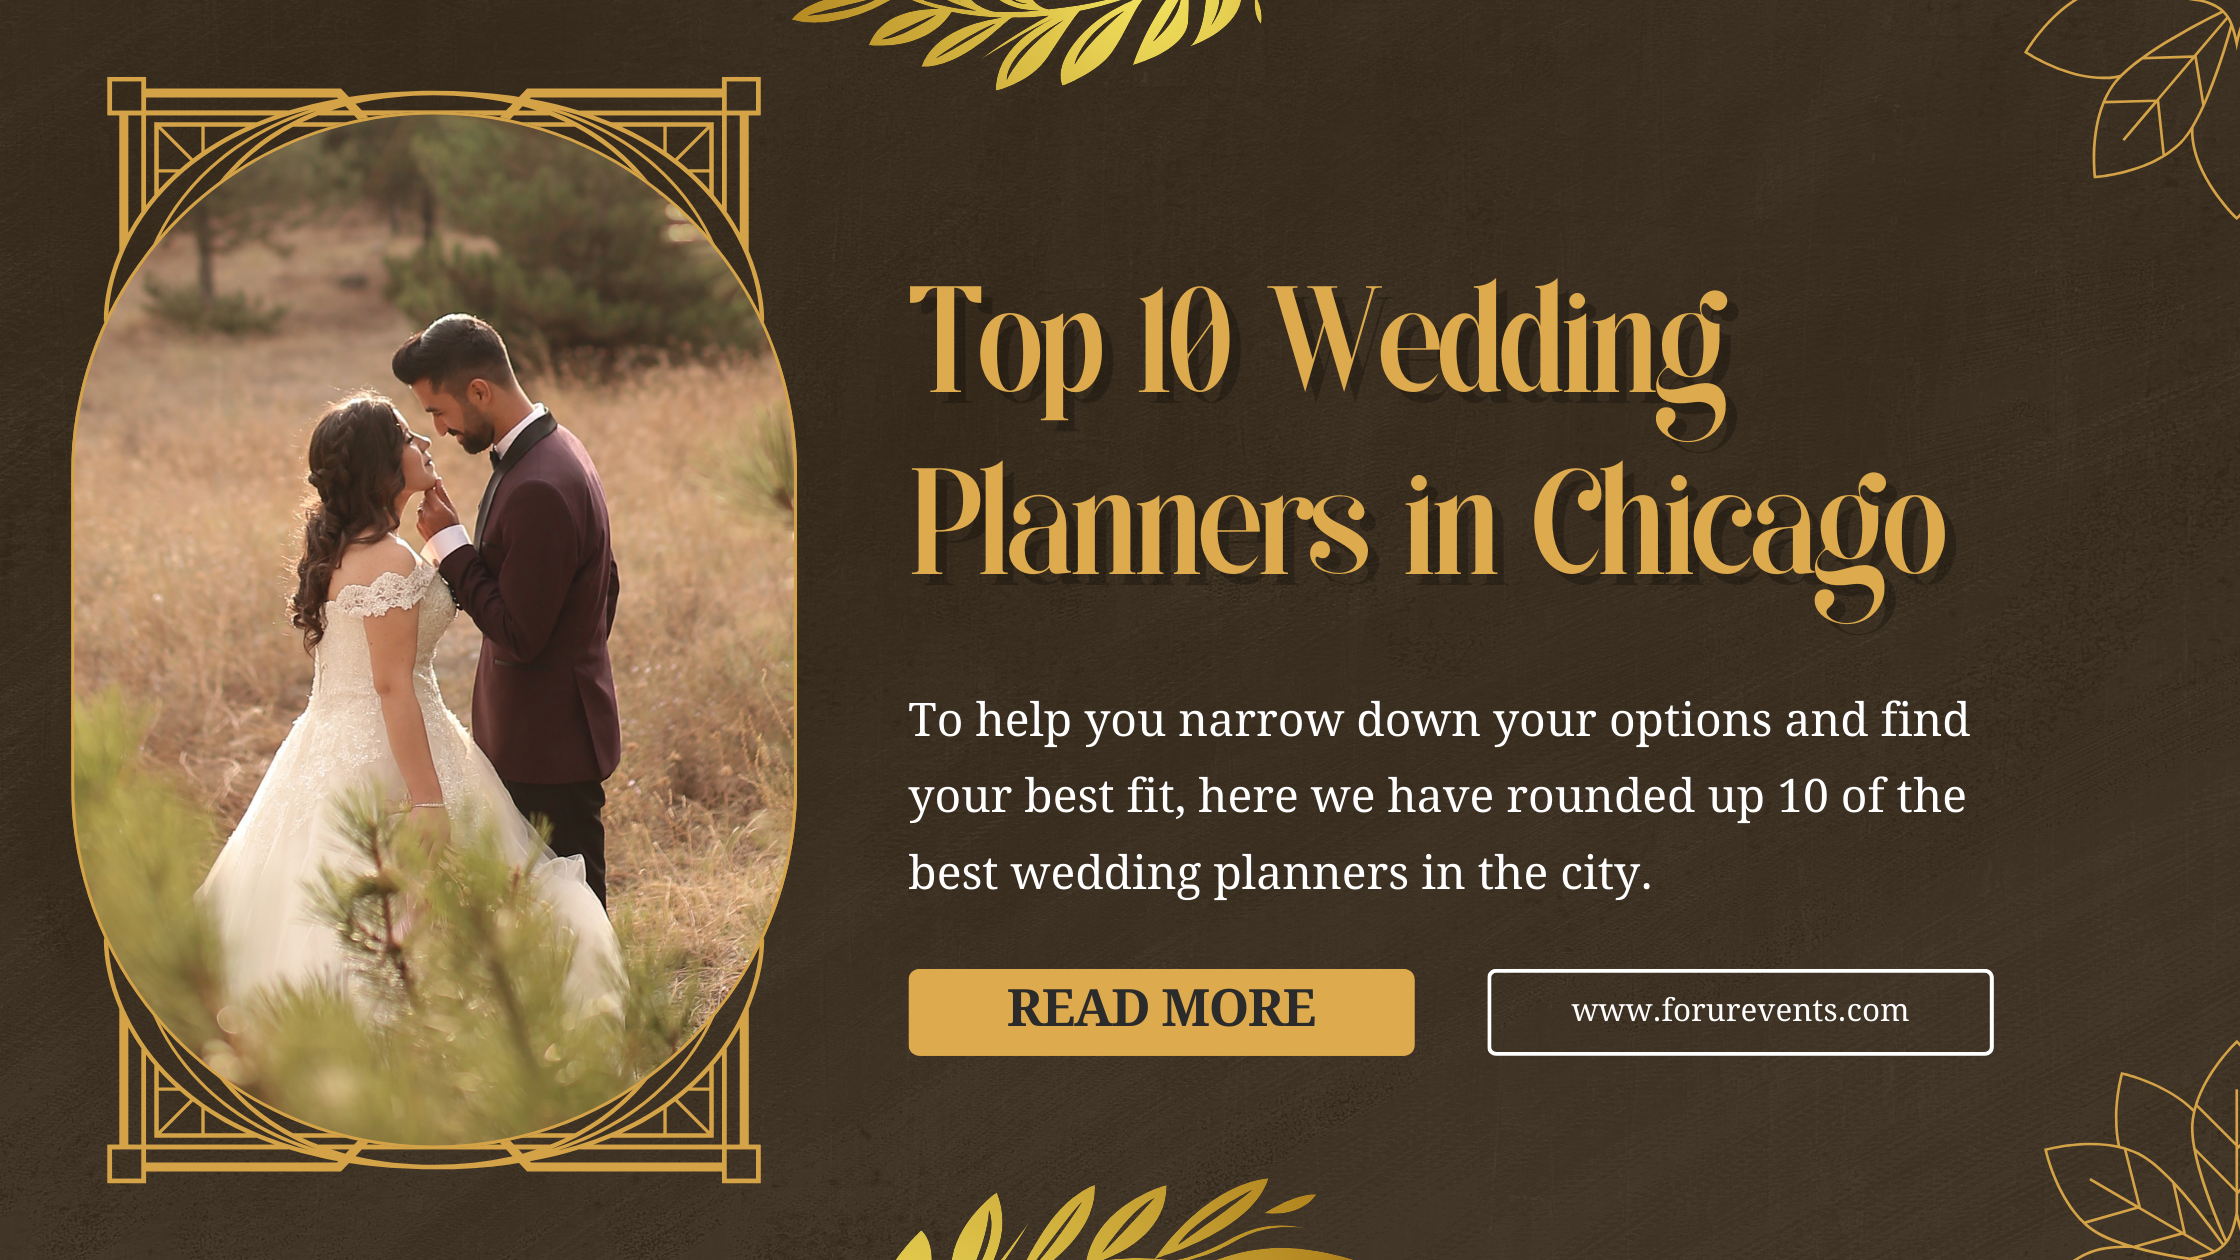 Top 10 Wedding Planners in Chicago